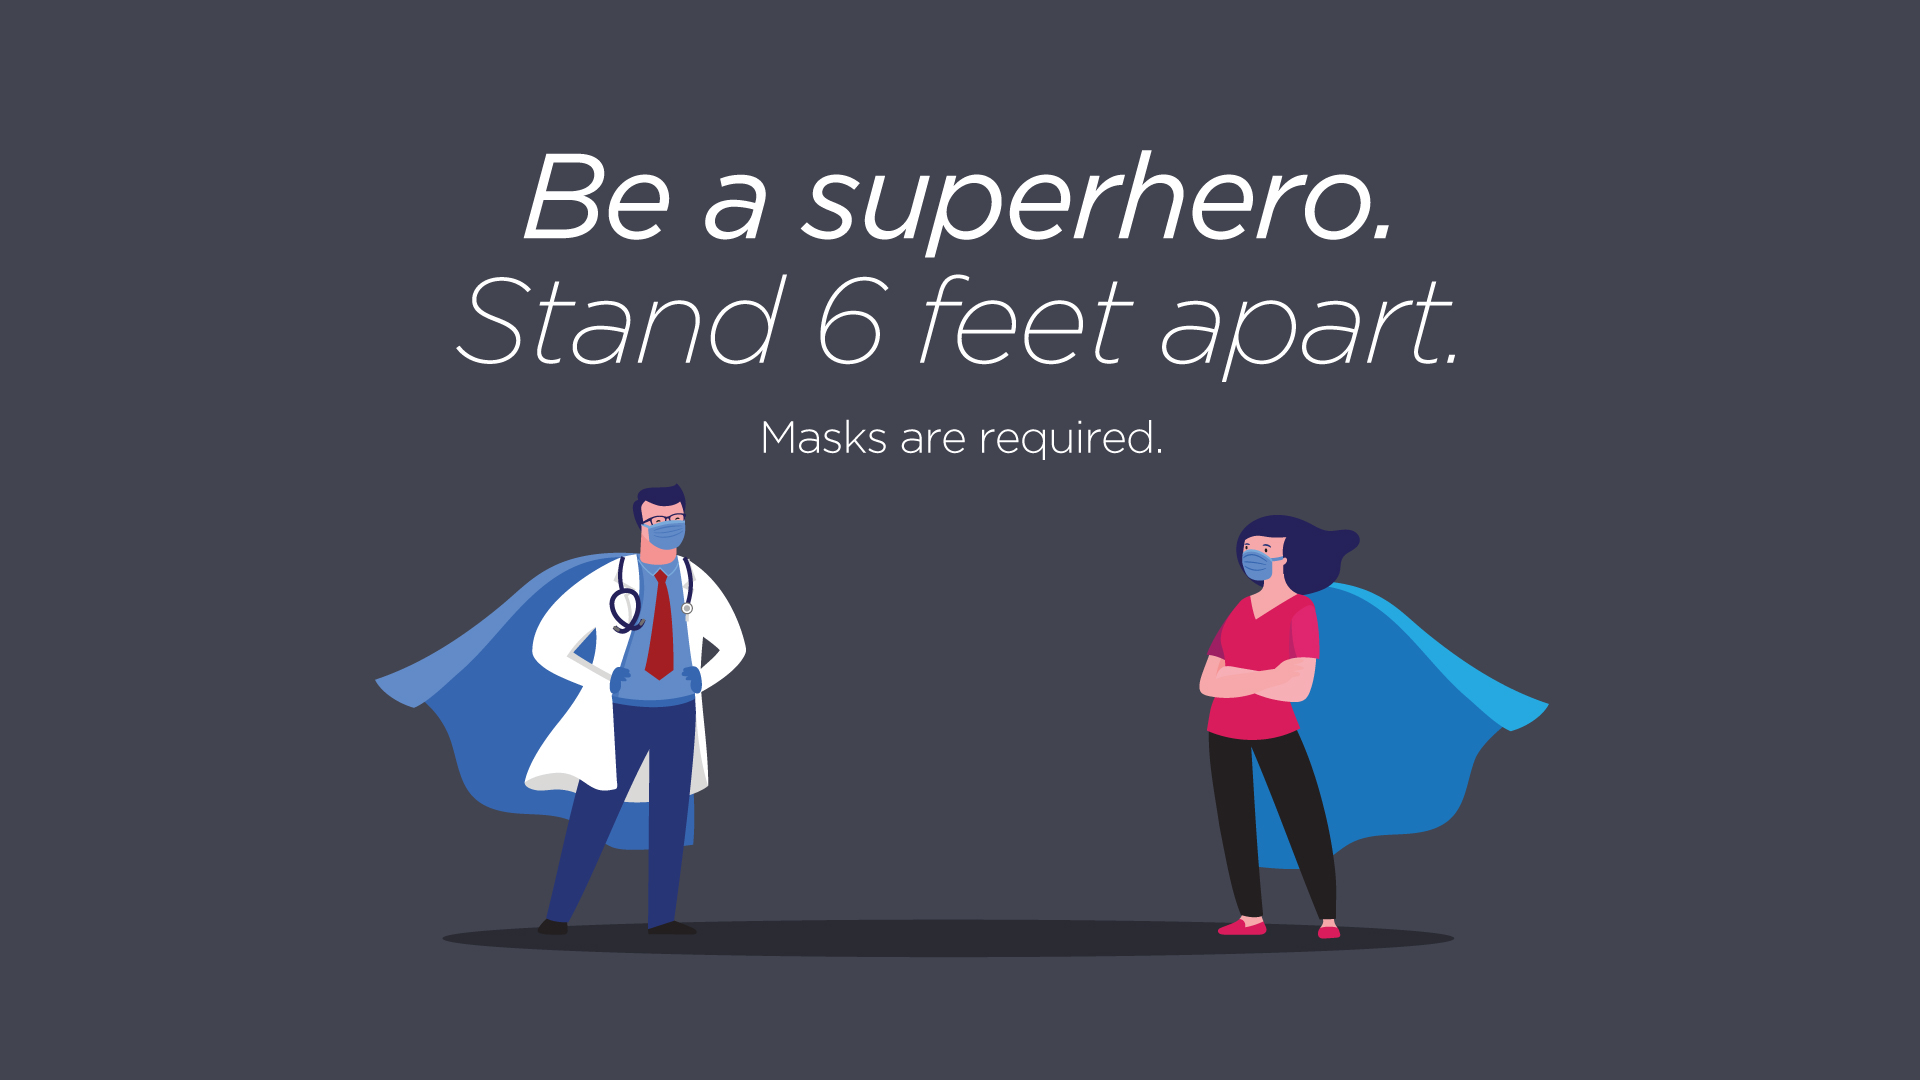 Be a superhero campaign graphic with healthcare providers wearing masks and capes